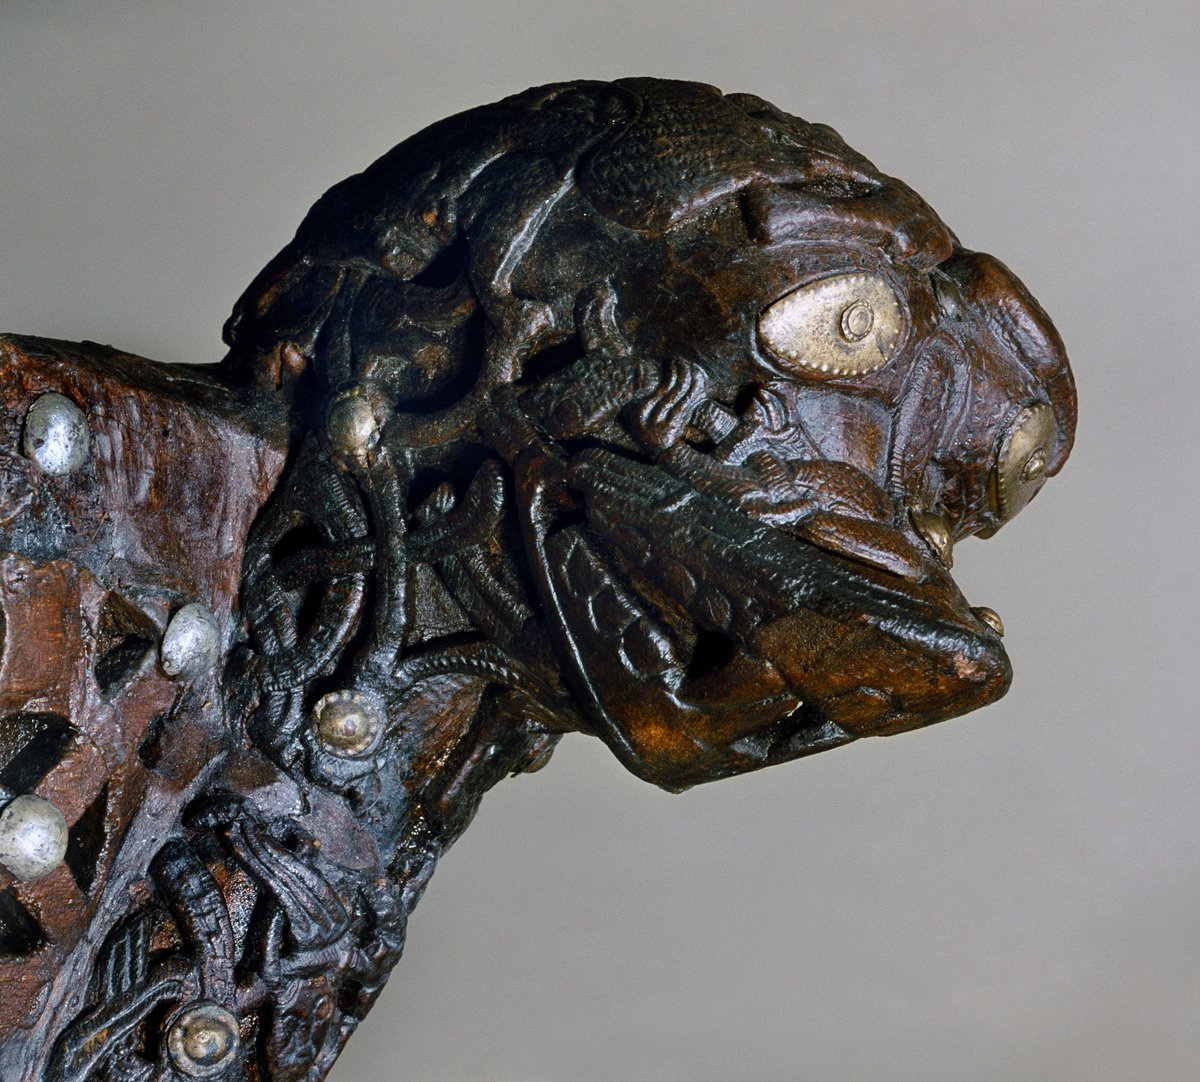 The animal head posts can be compared to some other animal heads found in the same grave. They are somewhat similar to those mounted at the corners of the three ornate sleighs from Oseberg. Photo: Eirik Irgens Johnsen, Ove Holst and others